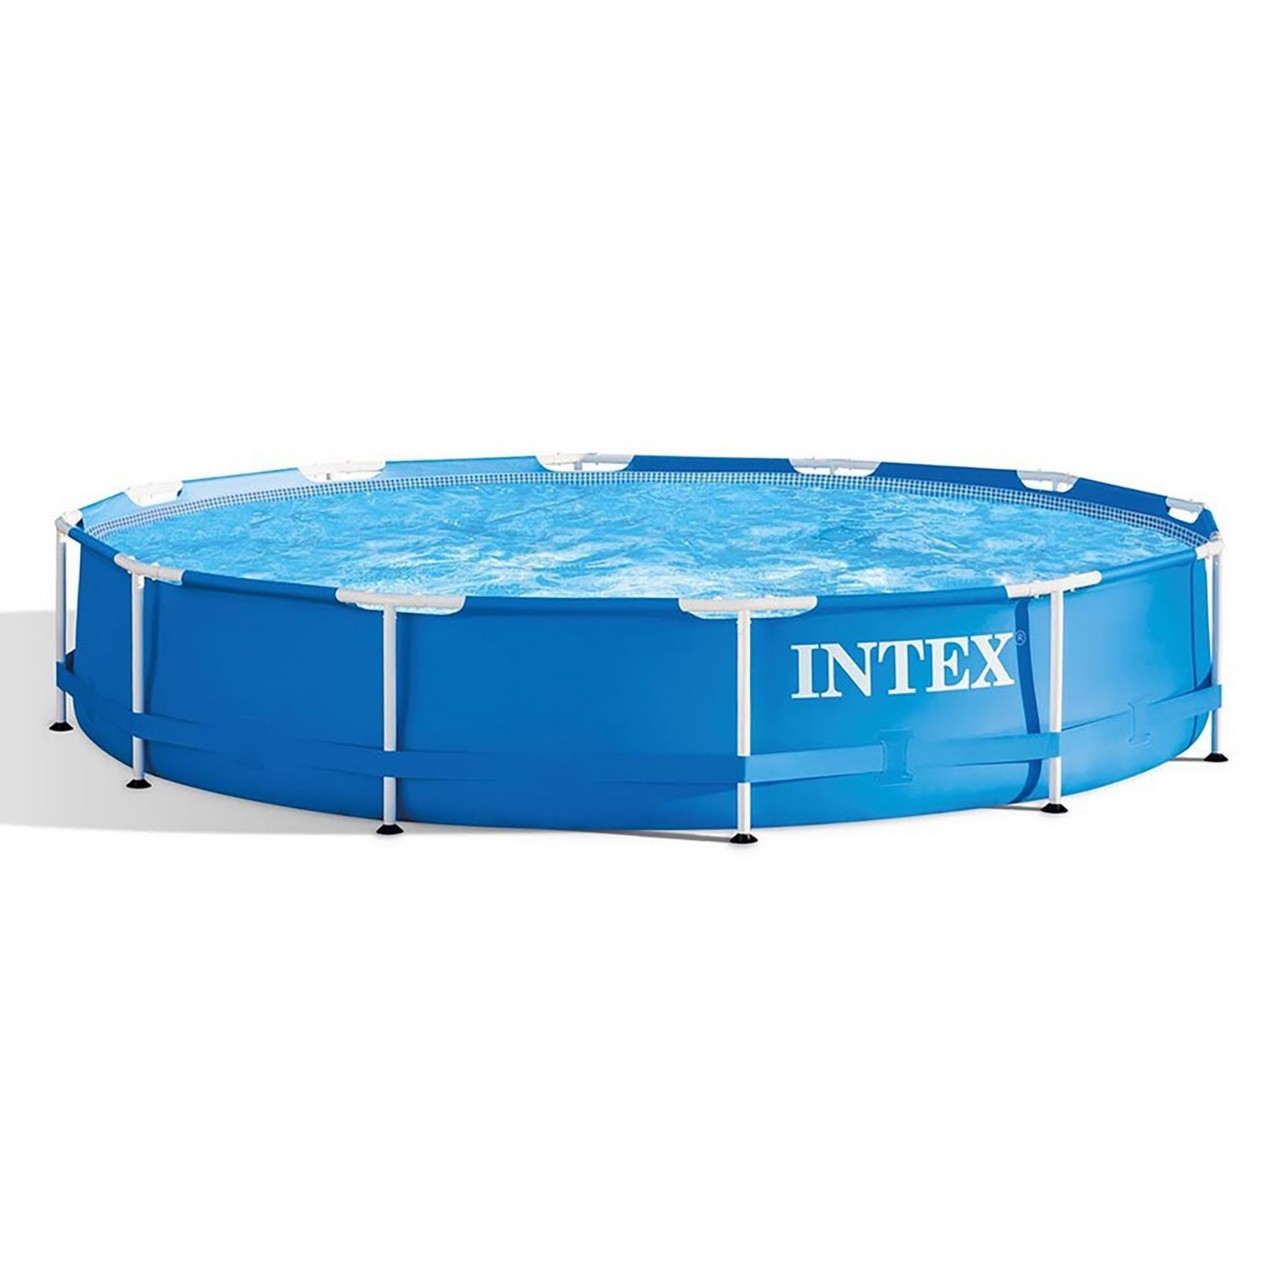 Image of a frame above ground pool. Intex.